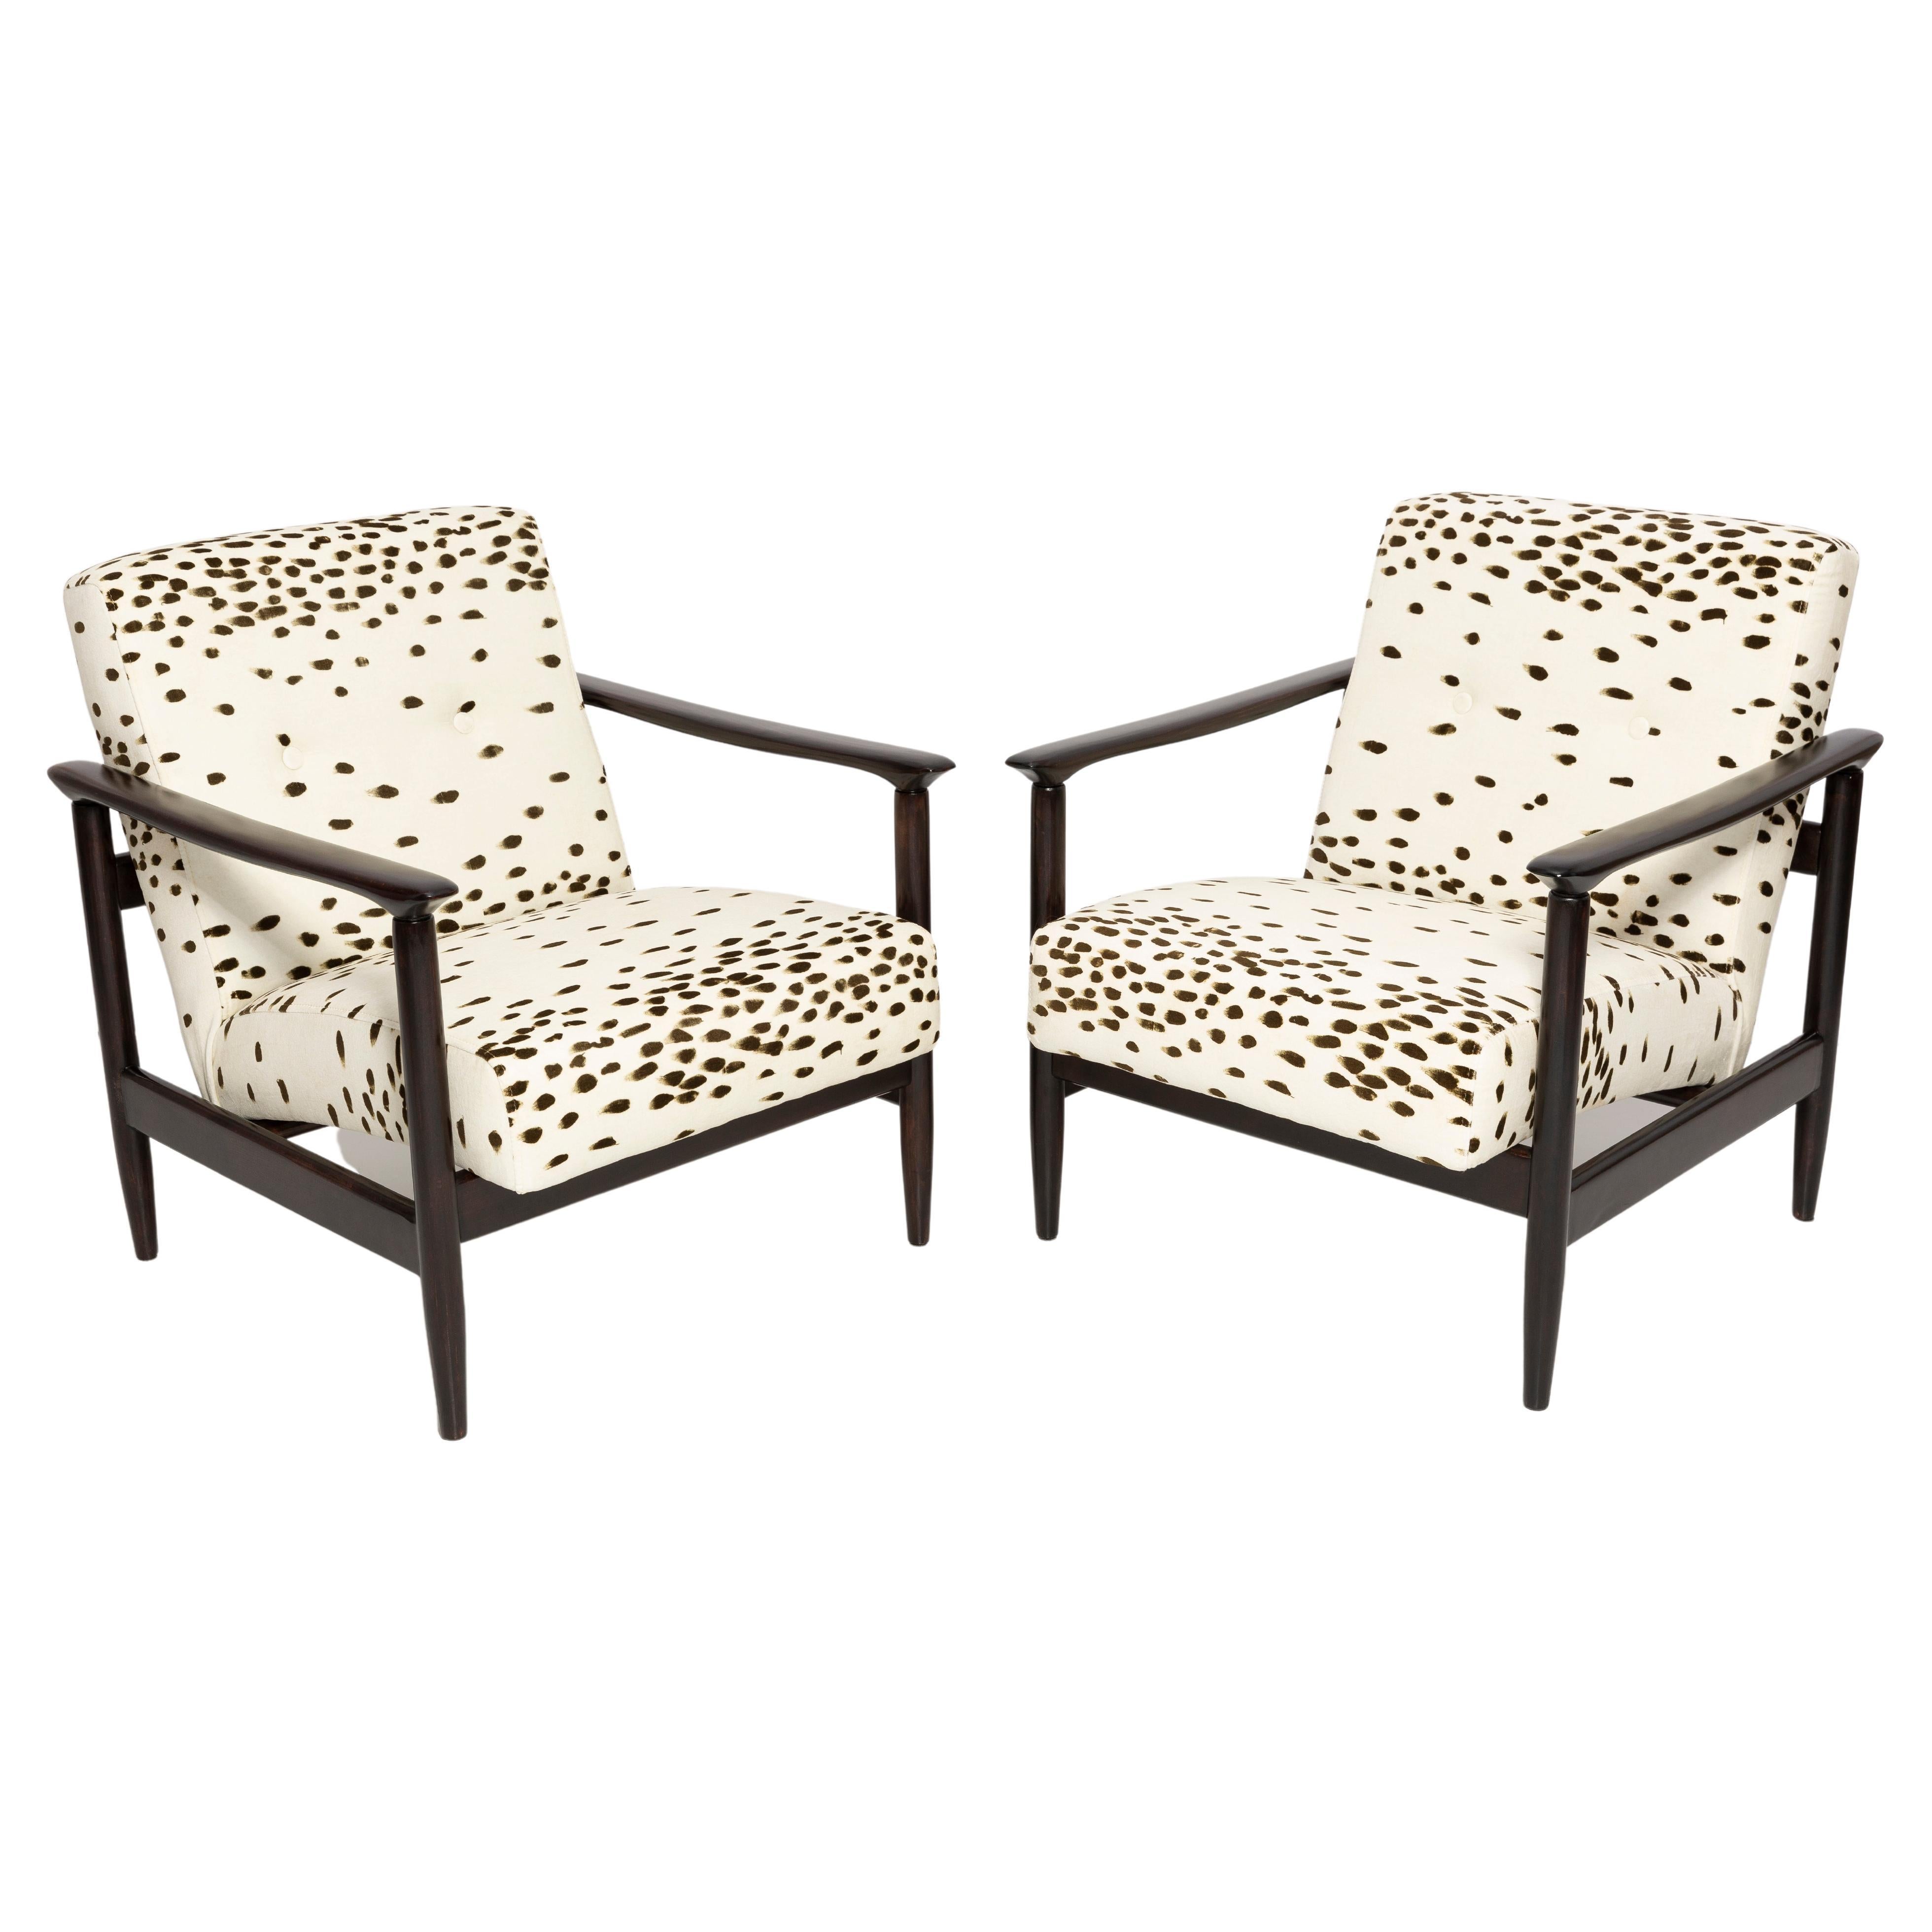 Set of Two Mid Century Dalmatian Velvet Armchairs, by Edmund Homa, Europe, 1960s For Sale